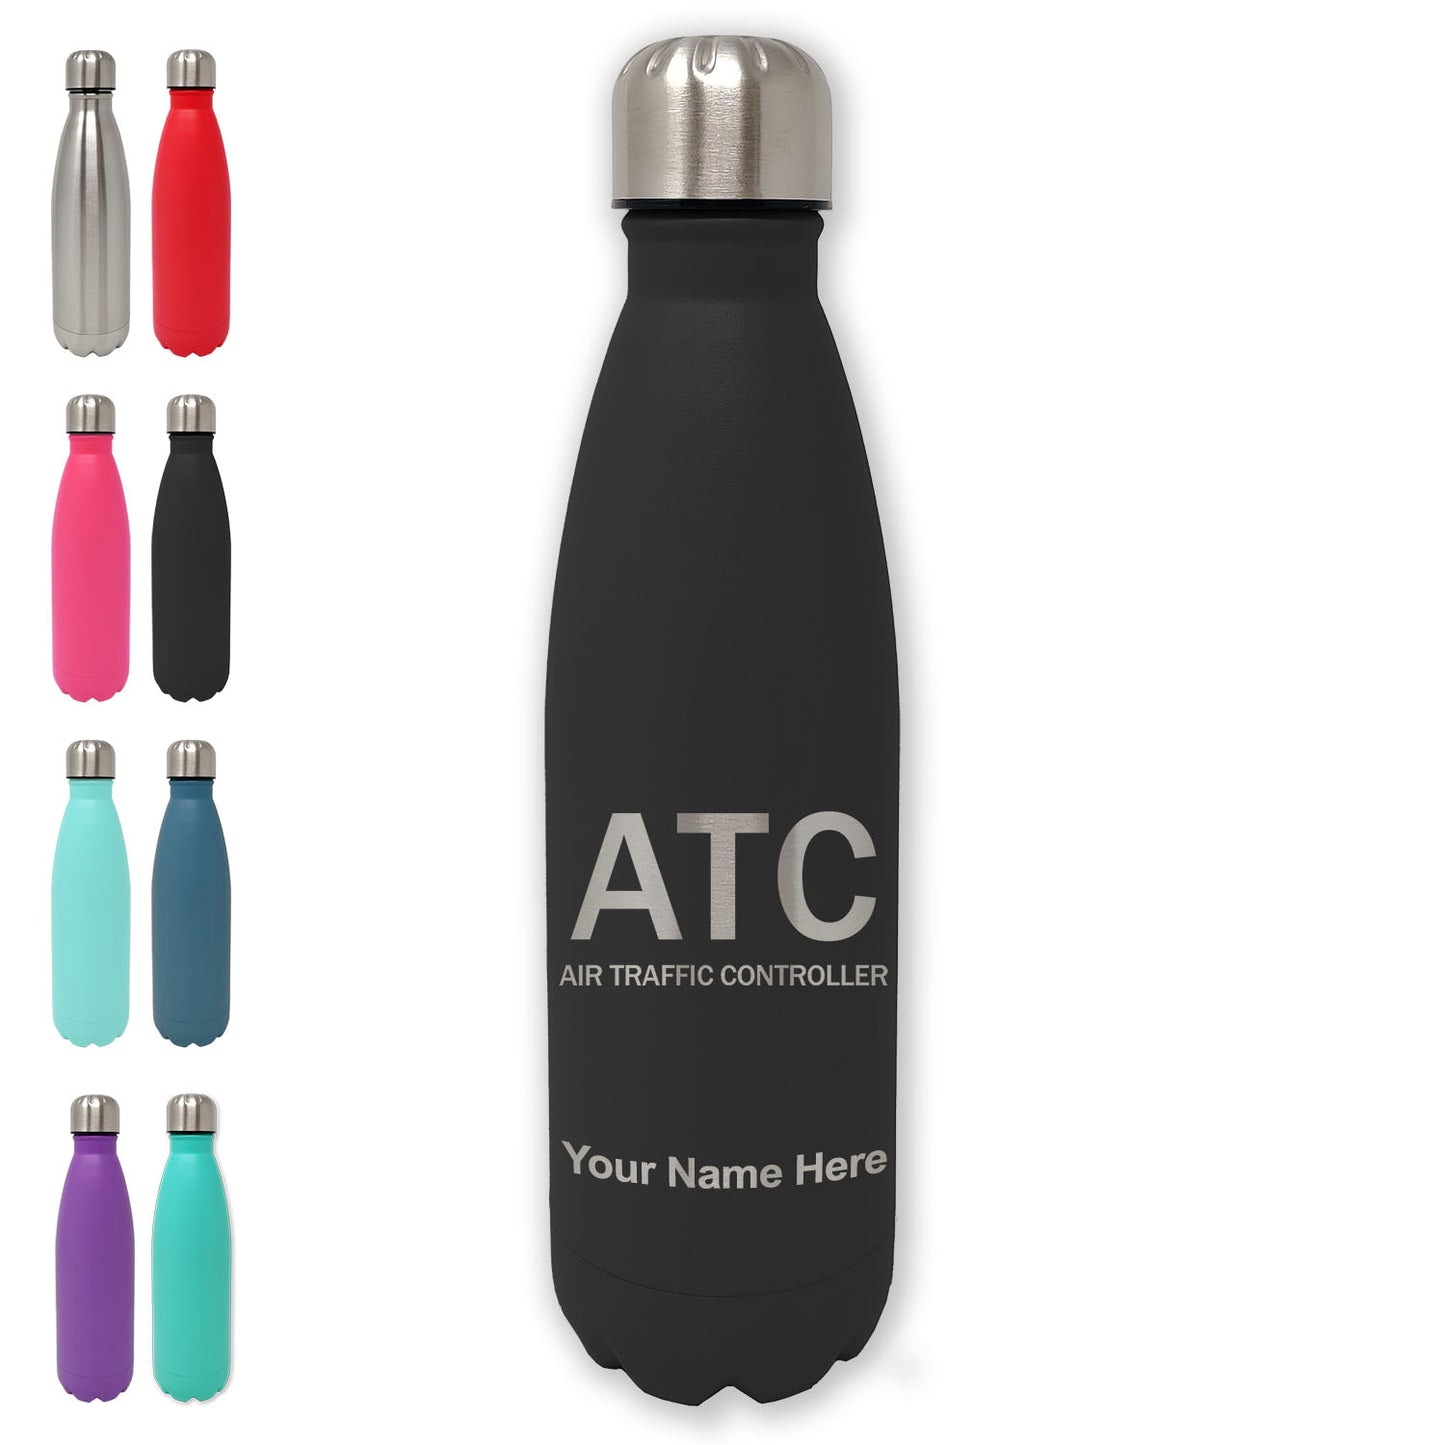 LaserGram Double Wall Water Bottle, ATC Air Traffic Controller, Personalized Engraving Included